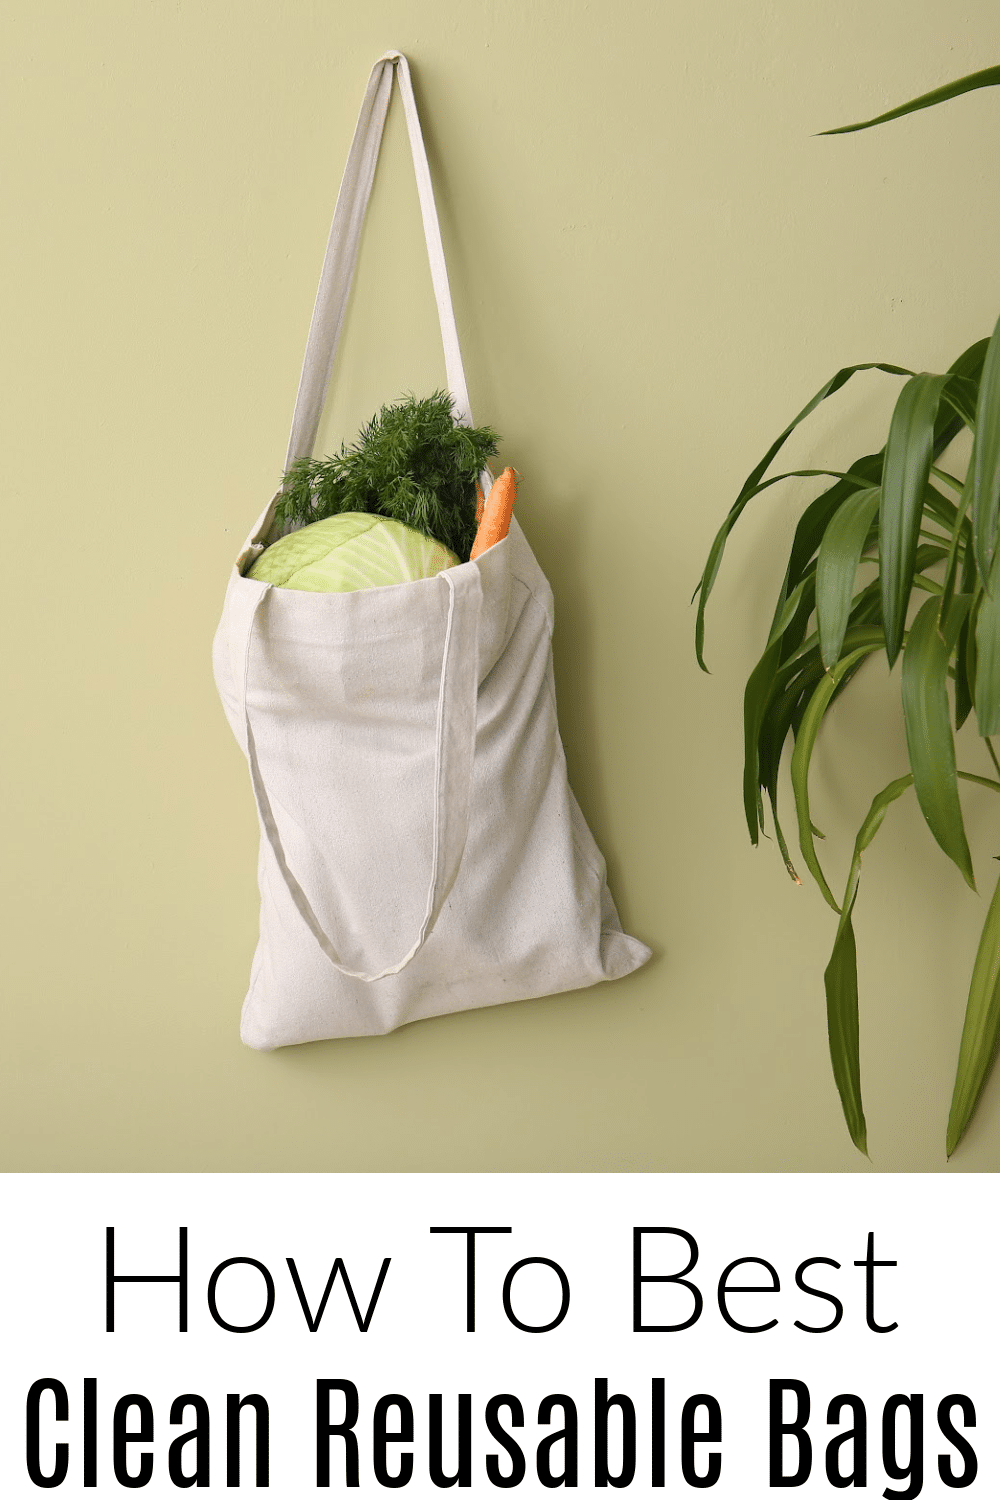 How to Clean Your Germy Reusable Shopping Bags